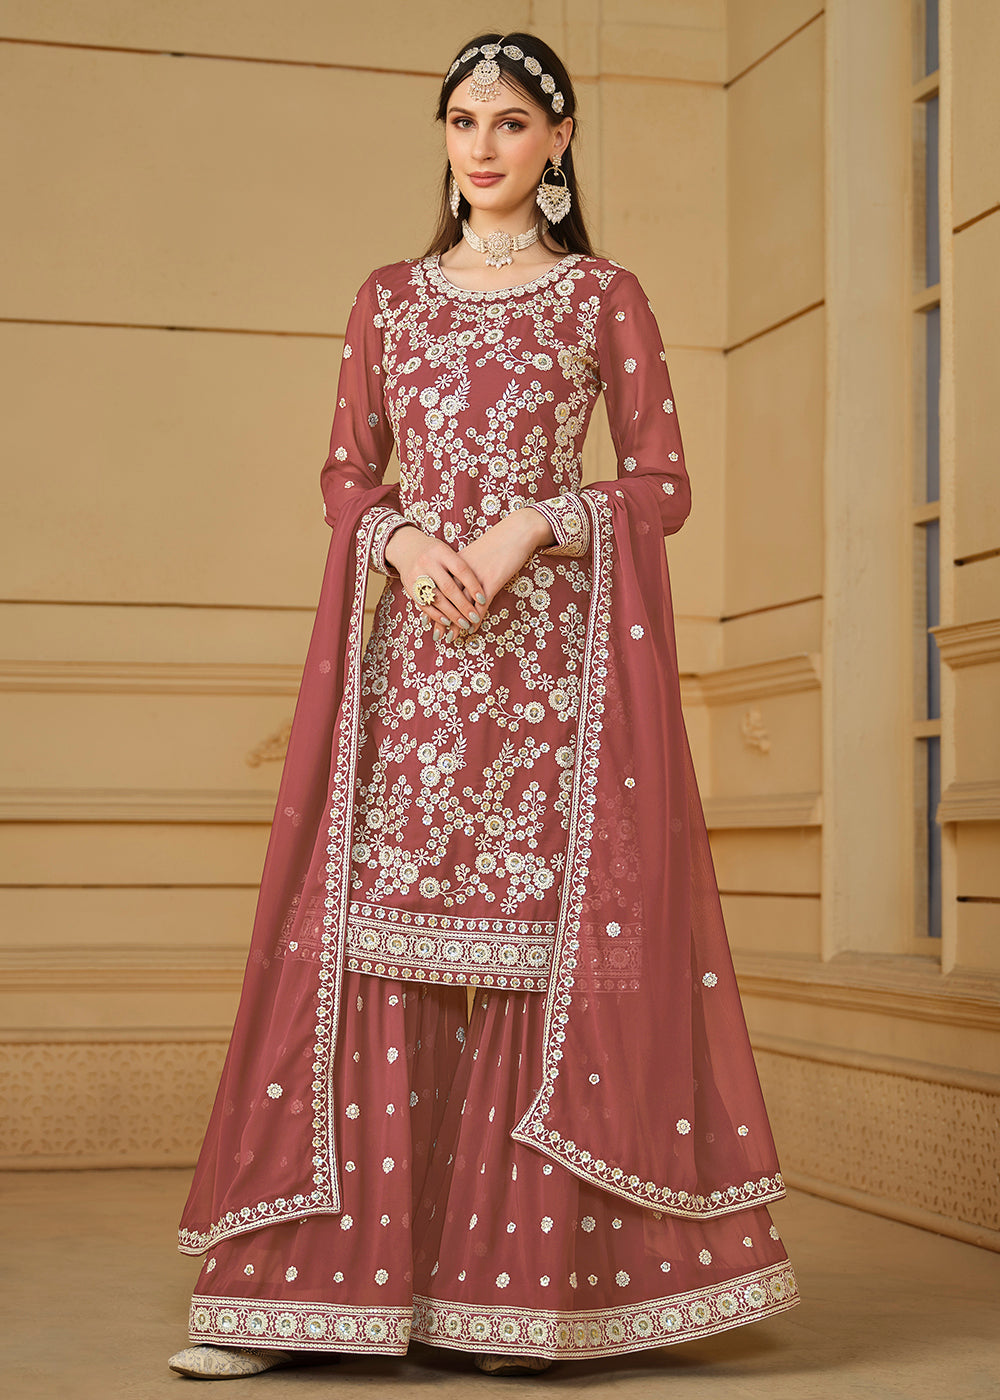 Shop Now Rust Brown Embroidered Georgette Gharara Style Suit Online at Empress Clothing in USA, UK, Canada, Italy & Worldwide.